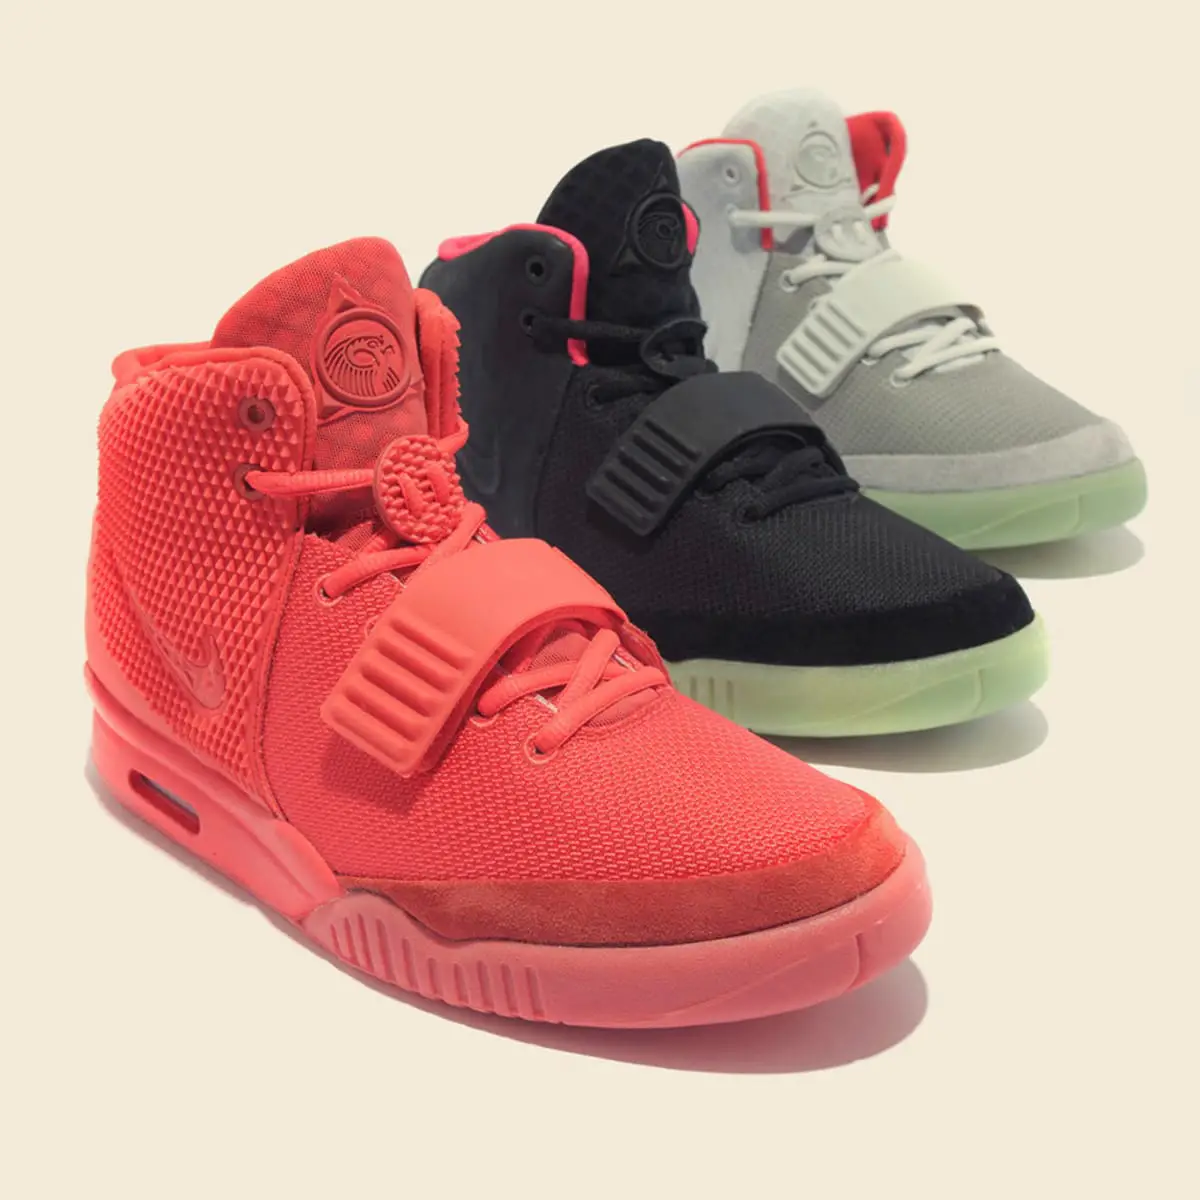 Which Yeezy Sneaker Is the Greatest of All Time?